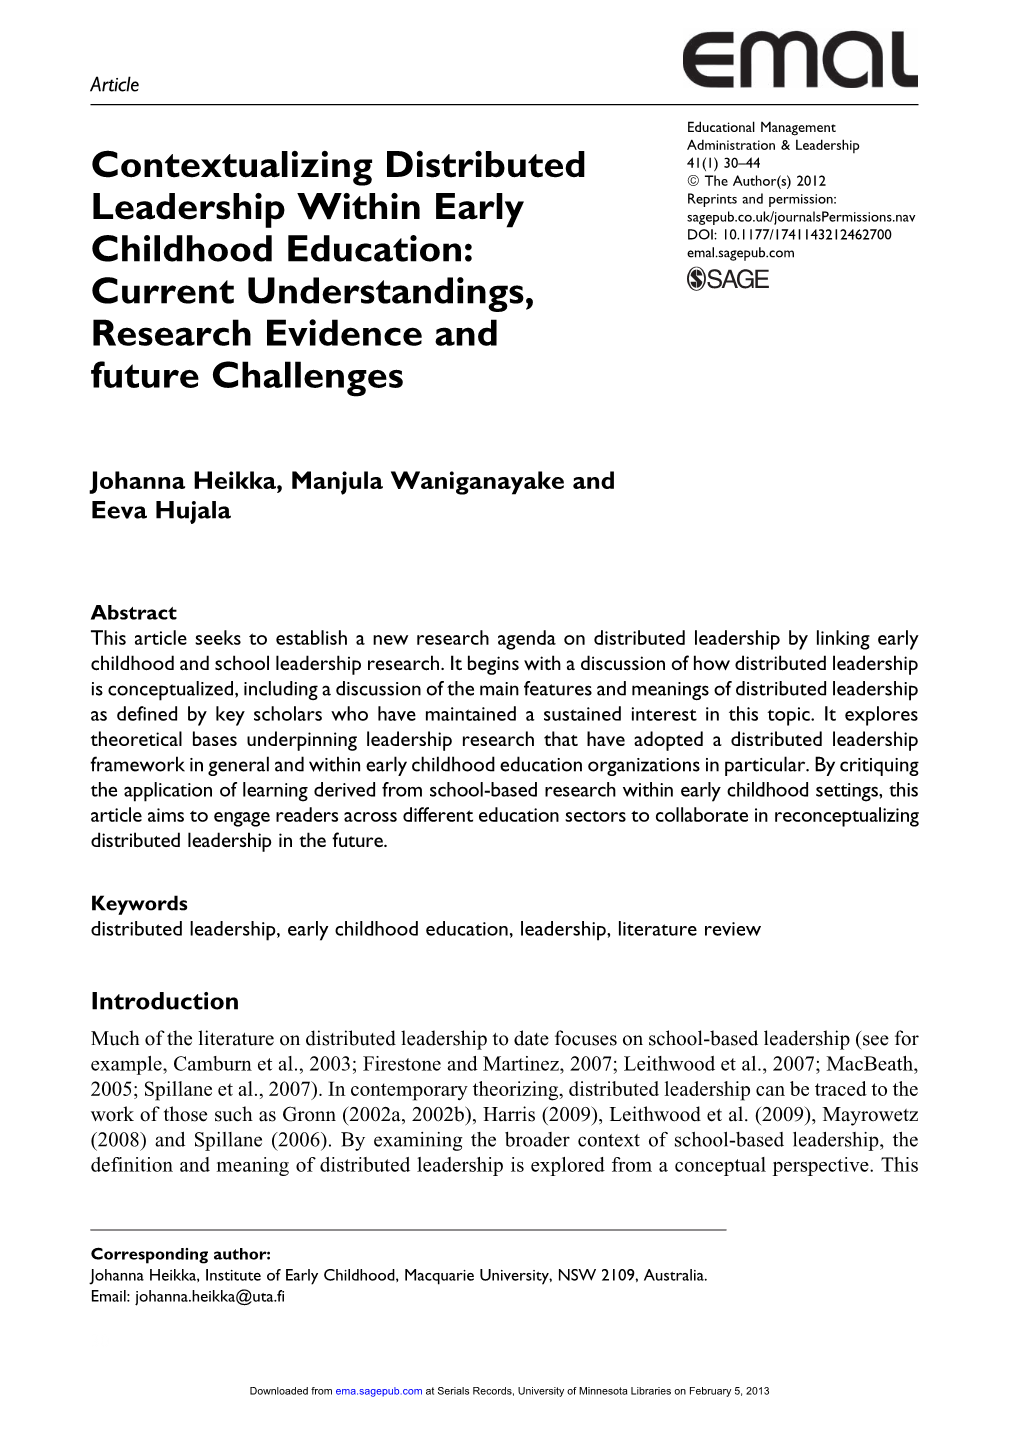 Contextualizing Distributed Leadership Within Early Childhood